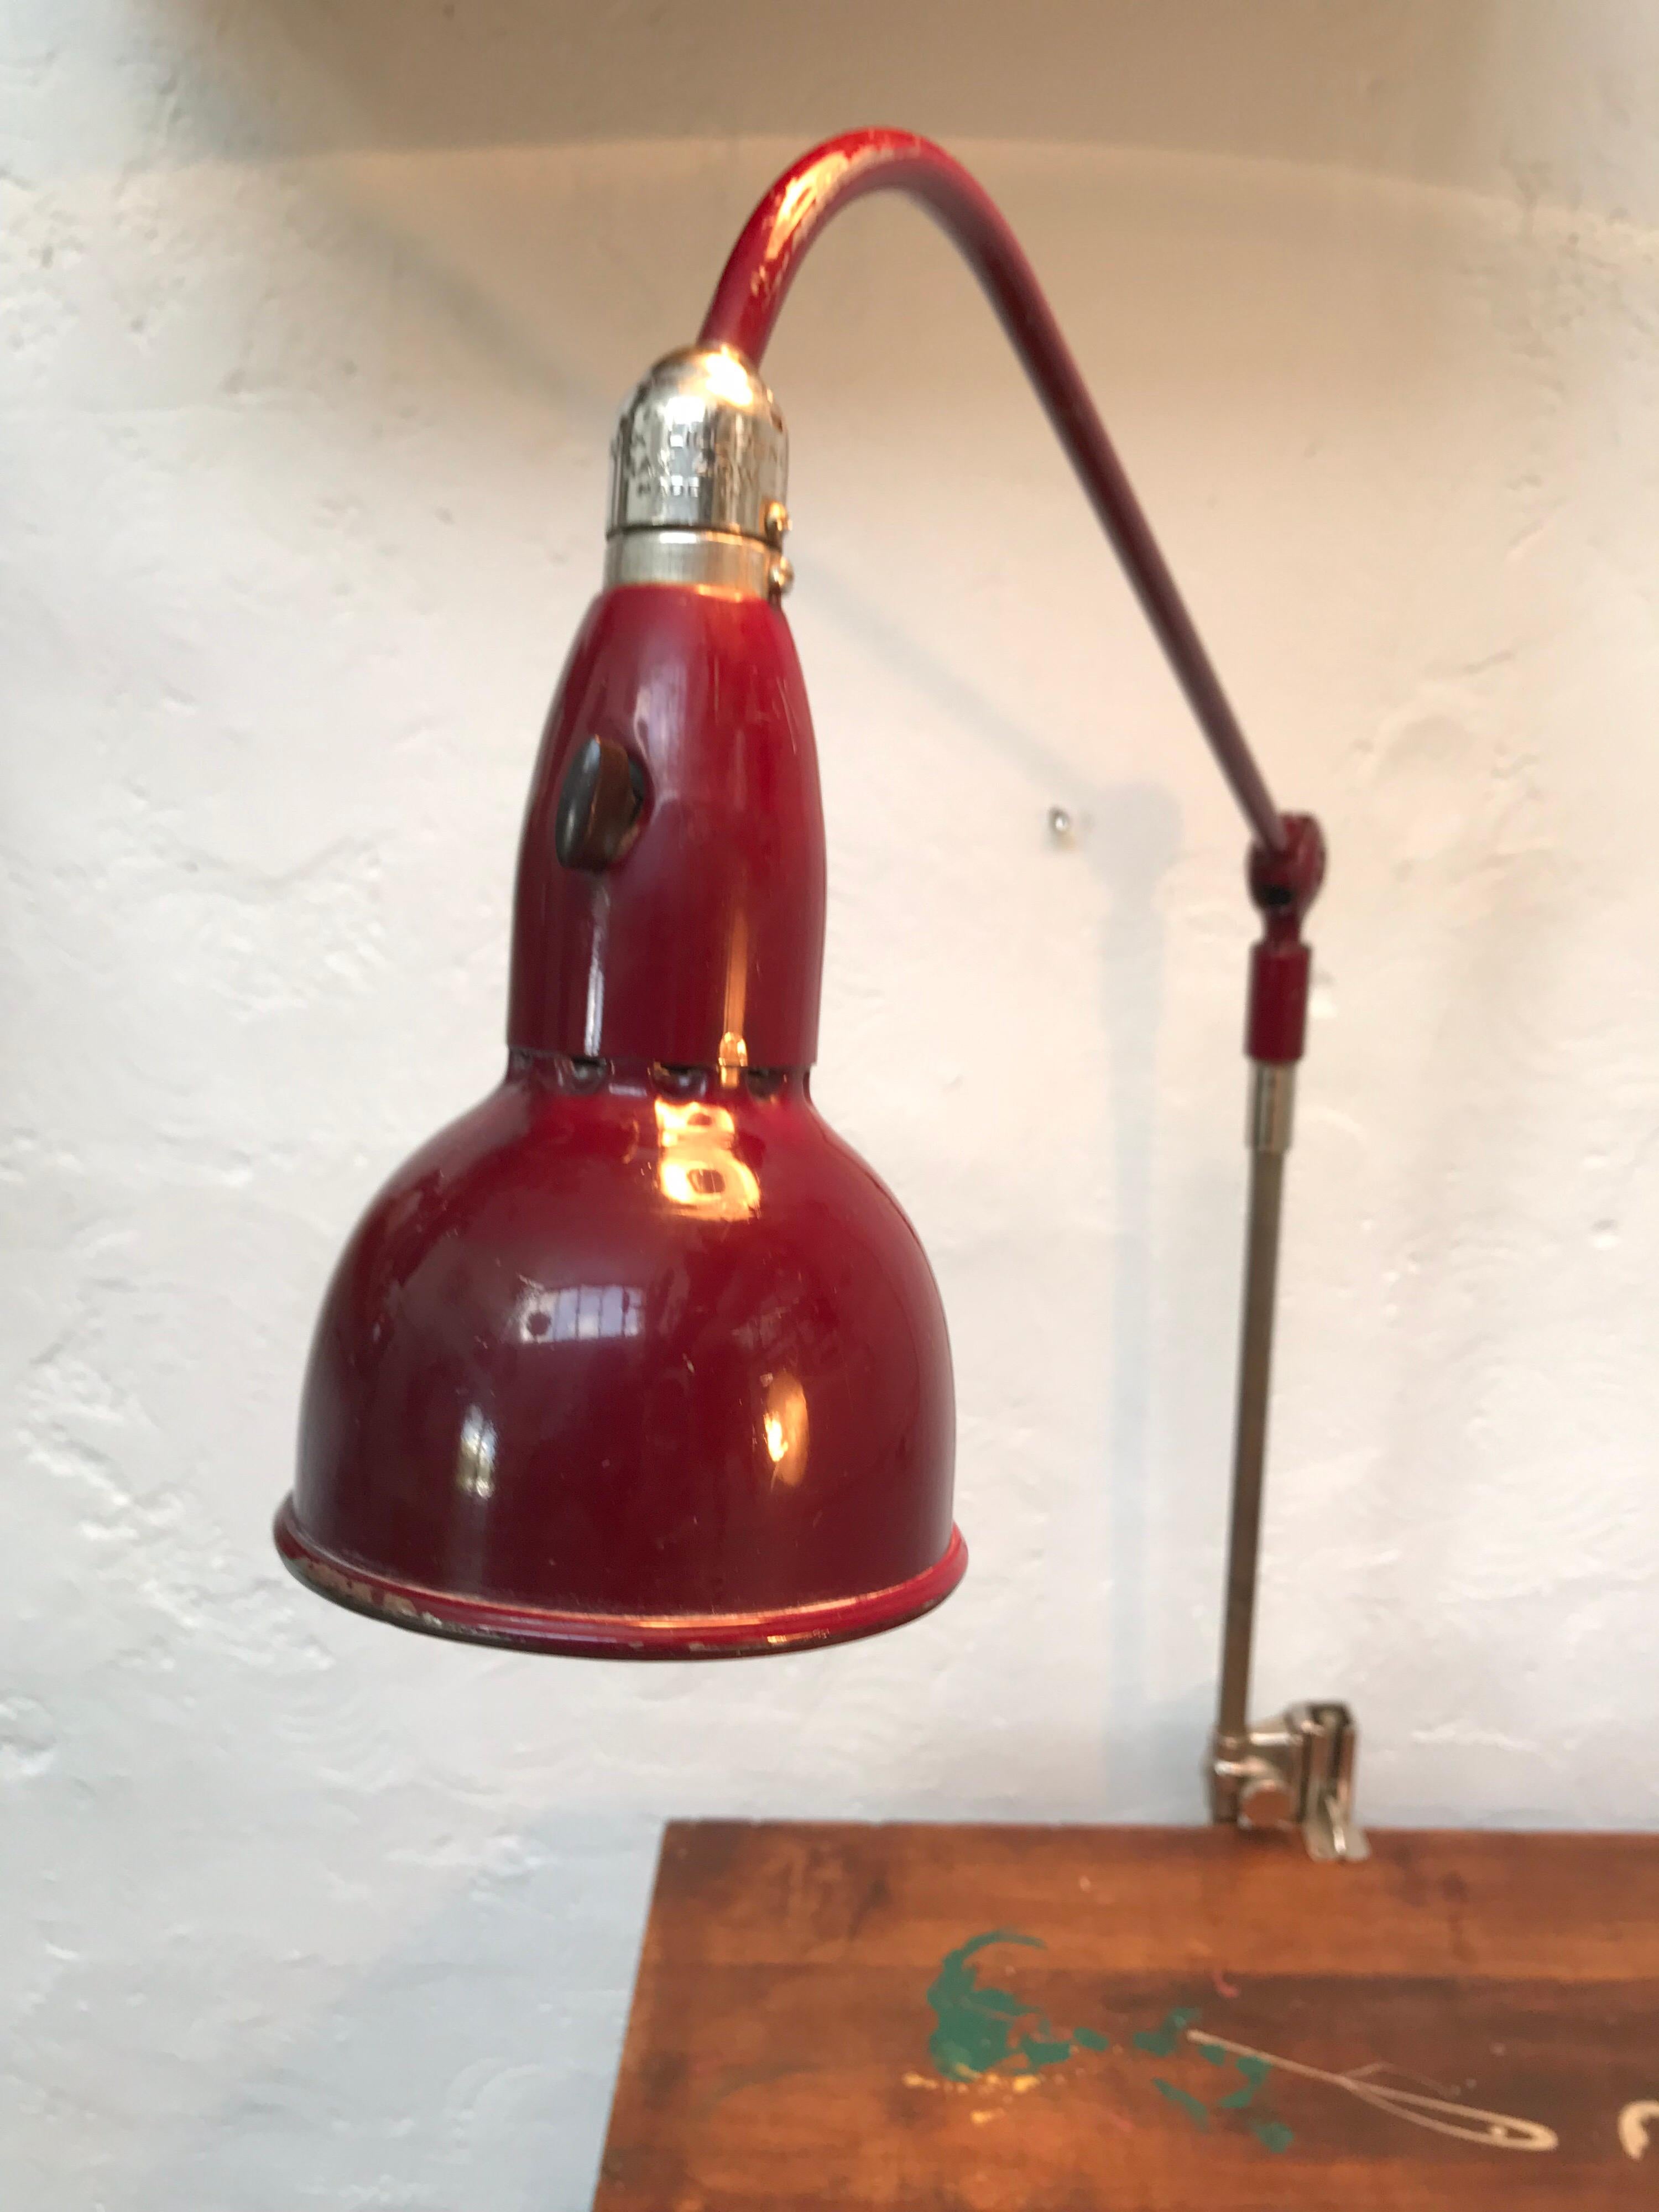 Industrial Vintage Swedish Triplex “Lill Pendel” Table Work Lamp from the 1950s